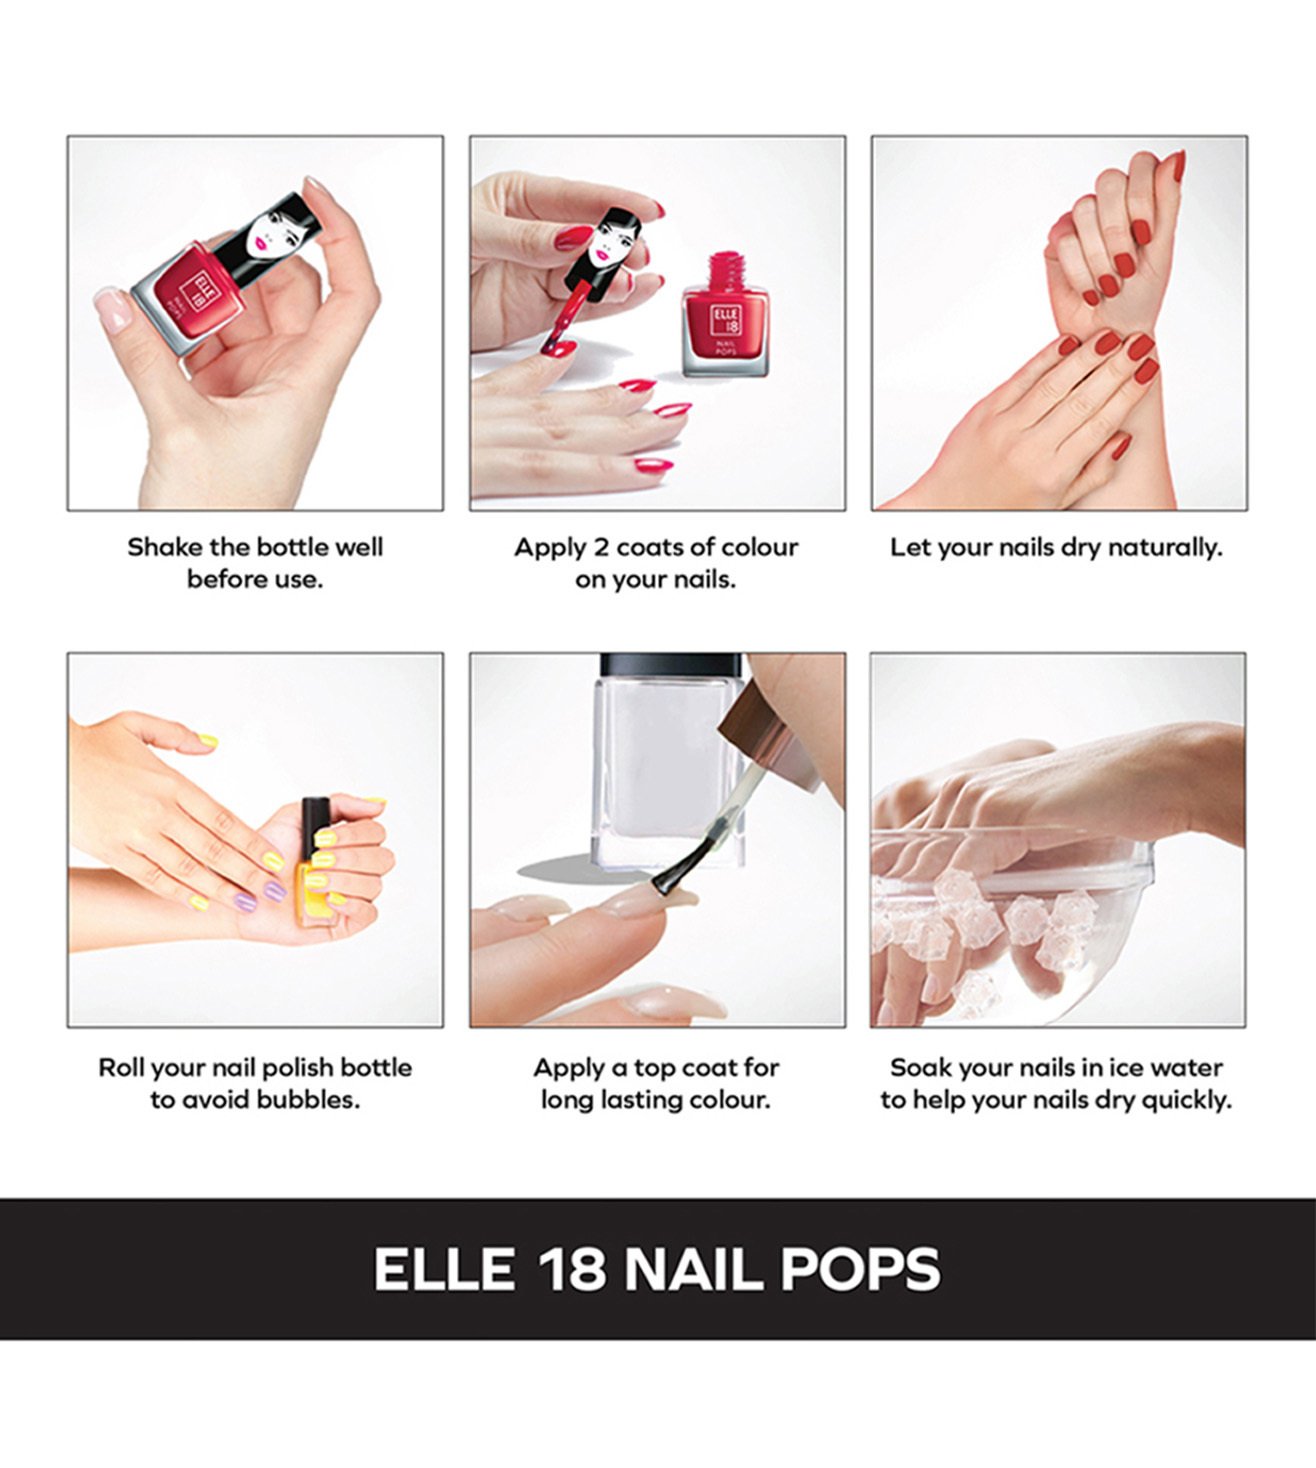 Buy Elle18 Nail Pops Nail Polish - Shade 27, 5ml Bottle Online at Low  Prices in India - Amazon.in